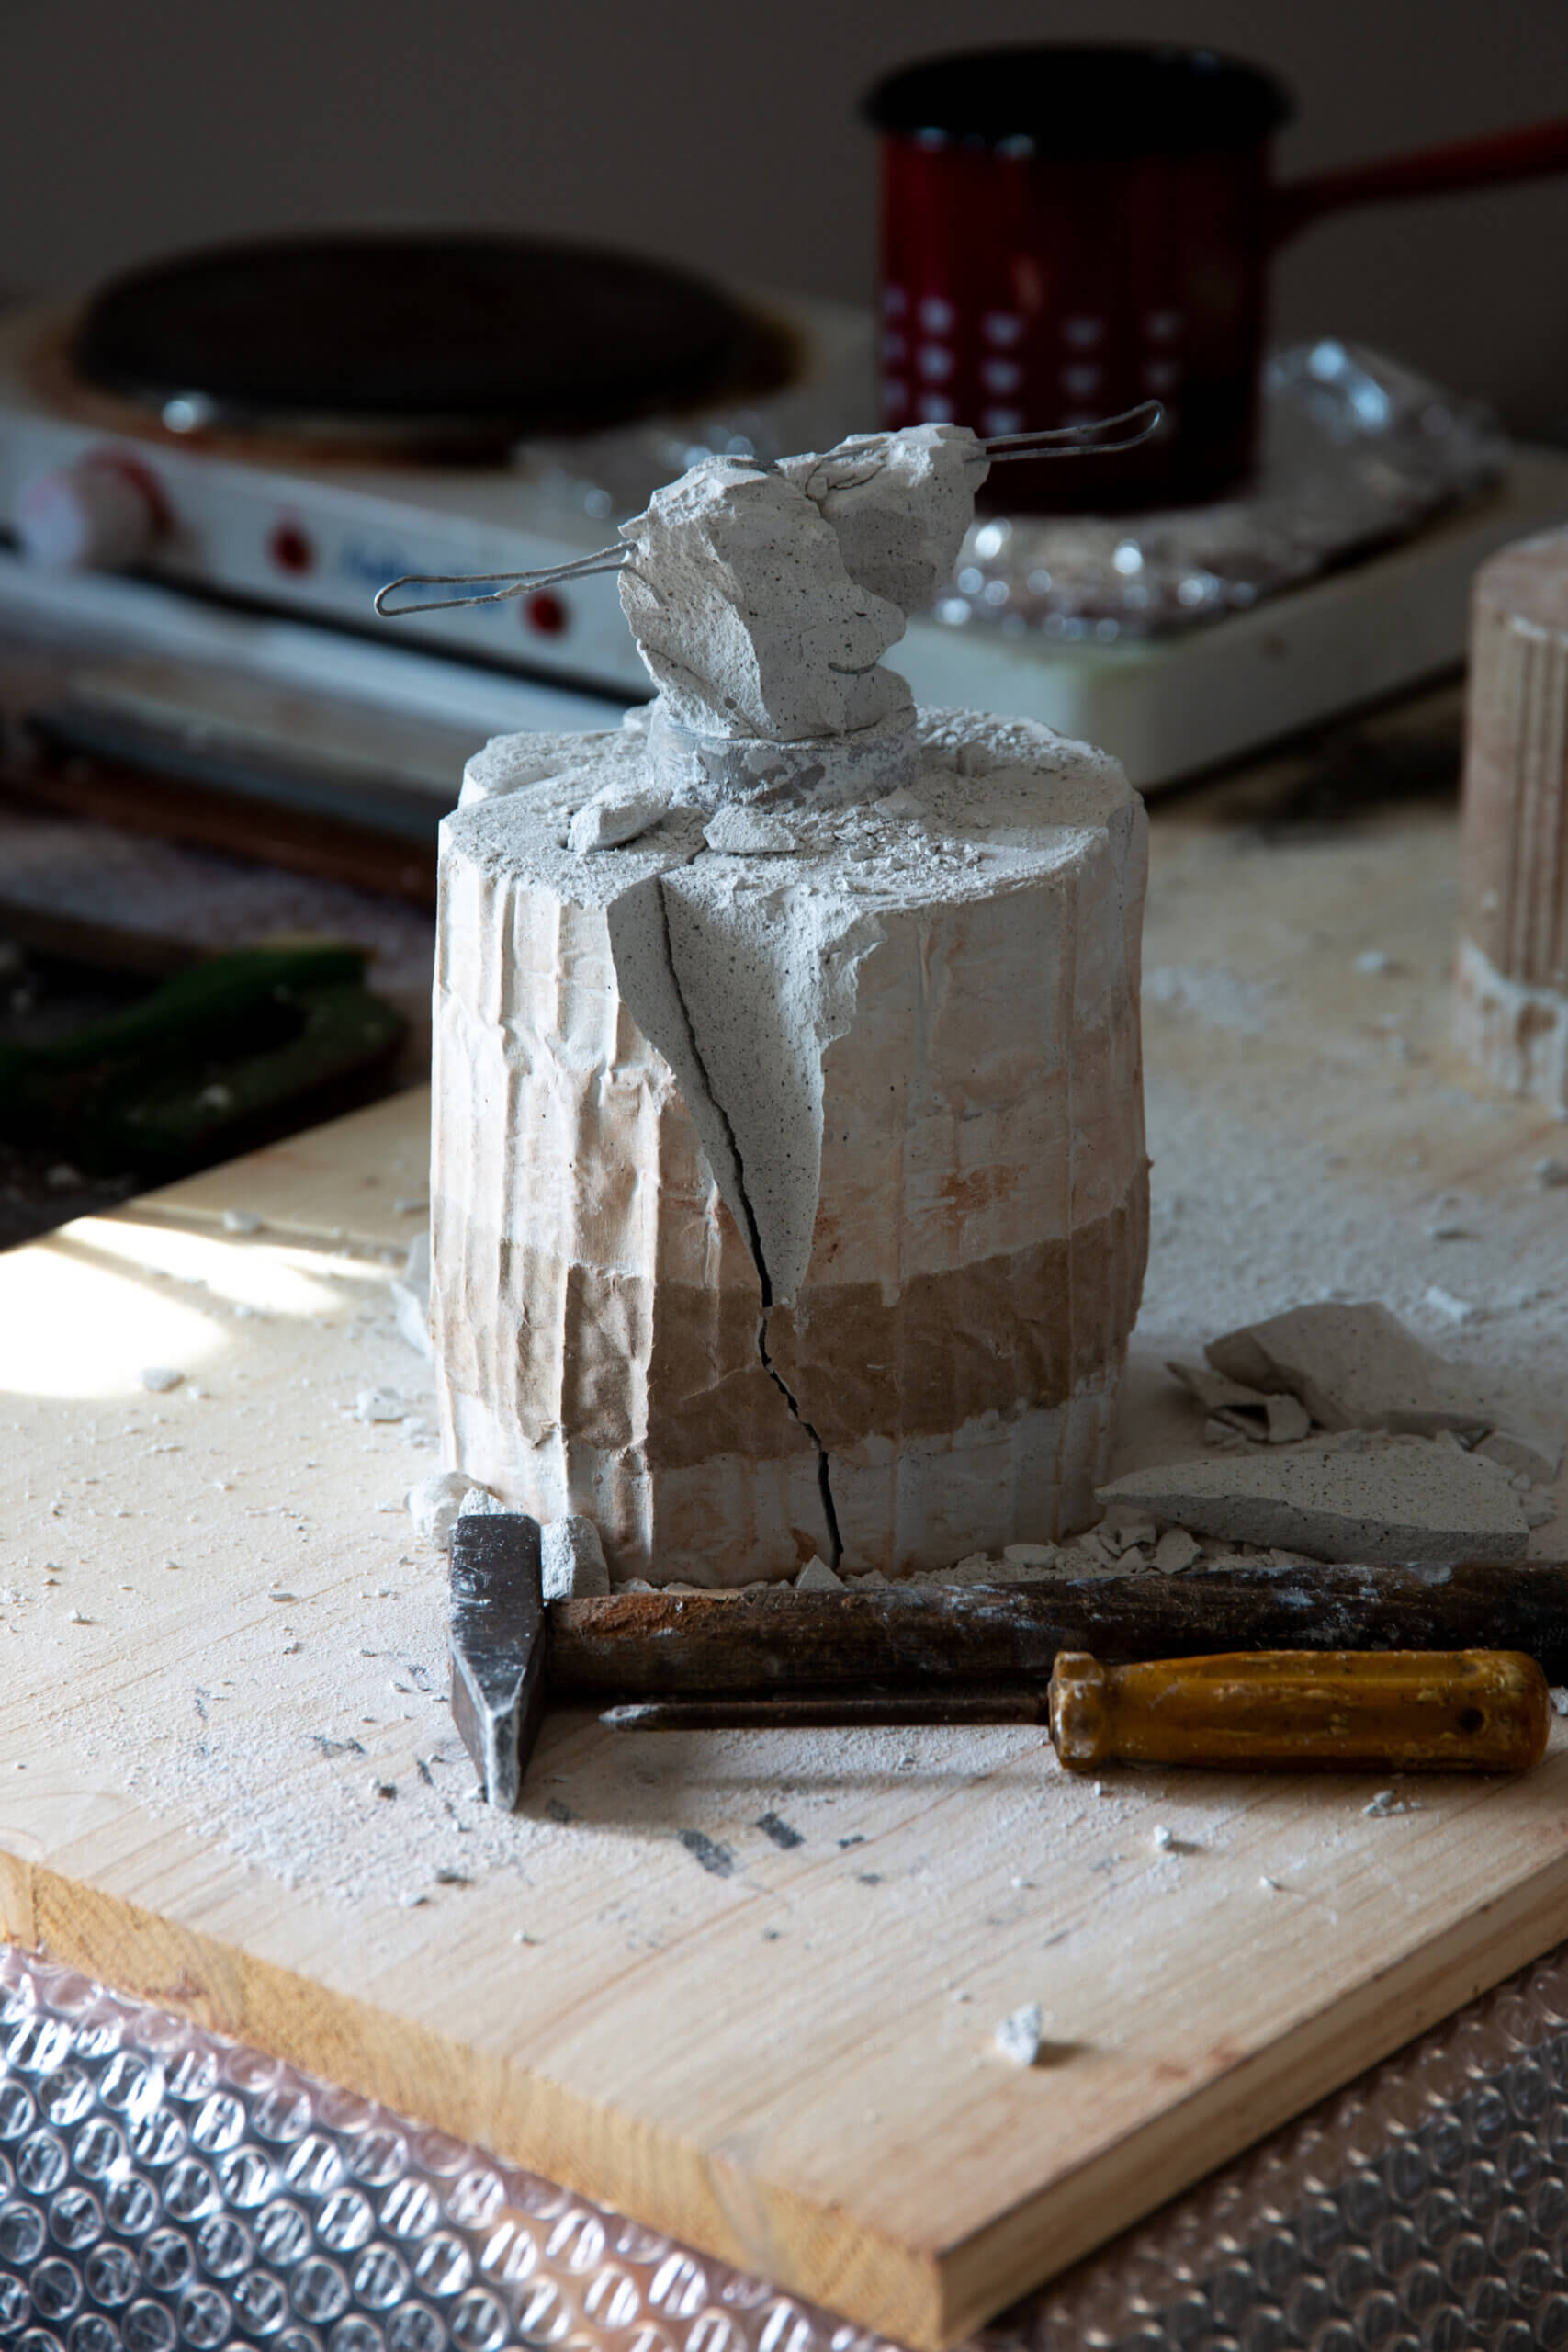 'The Lost Clay Workshop' by Marco Campardo Studio 21–23 April 2021 – MA Material Futures Central Saint Martins, London